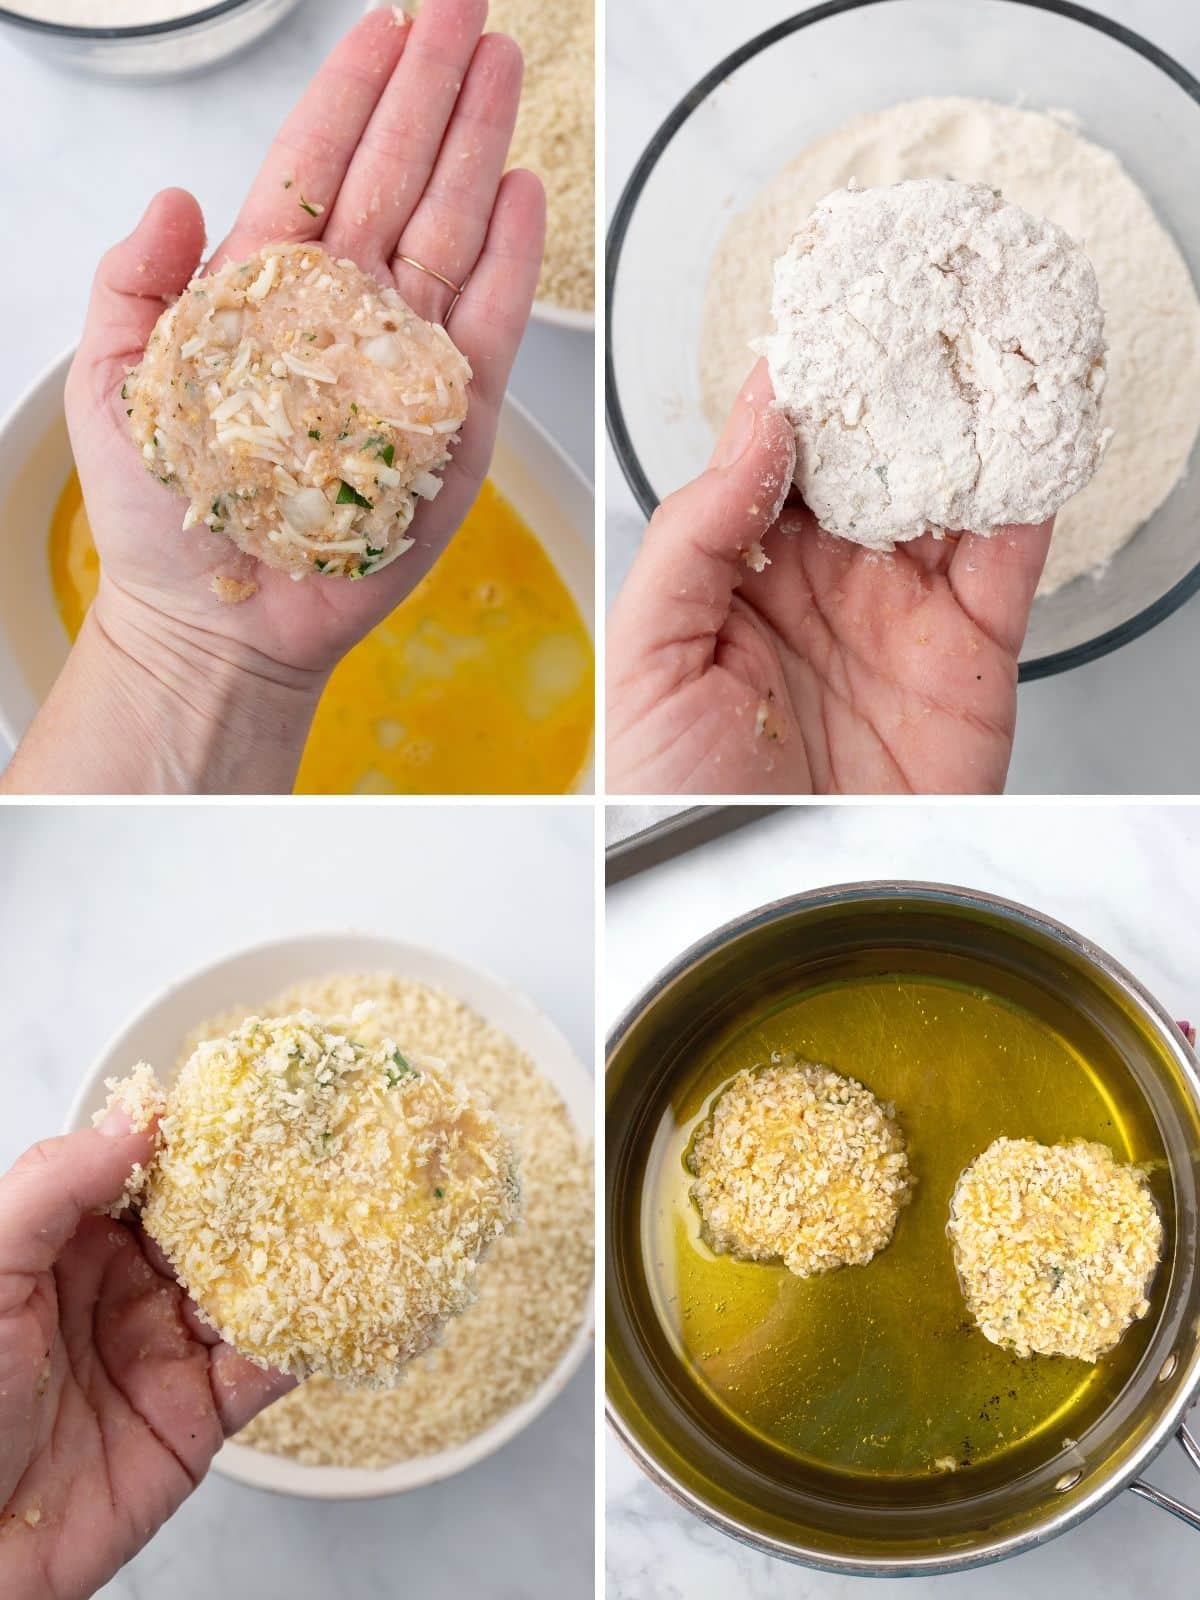 A collage of 4 images showing how to form and fry chicken patties.